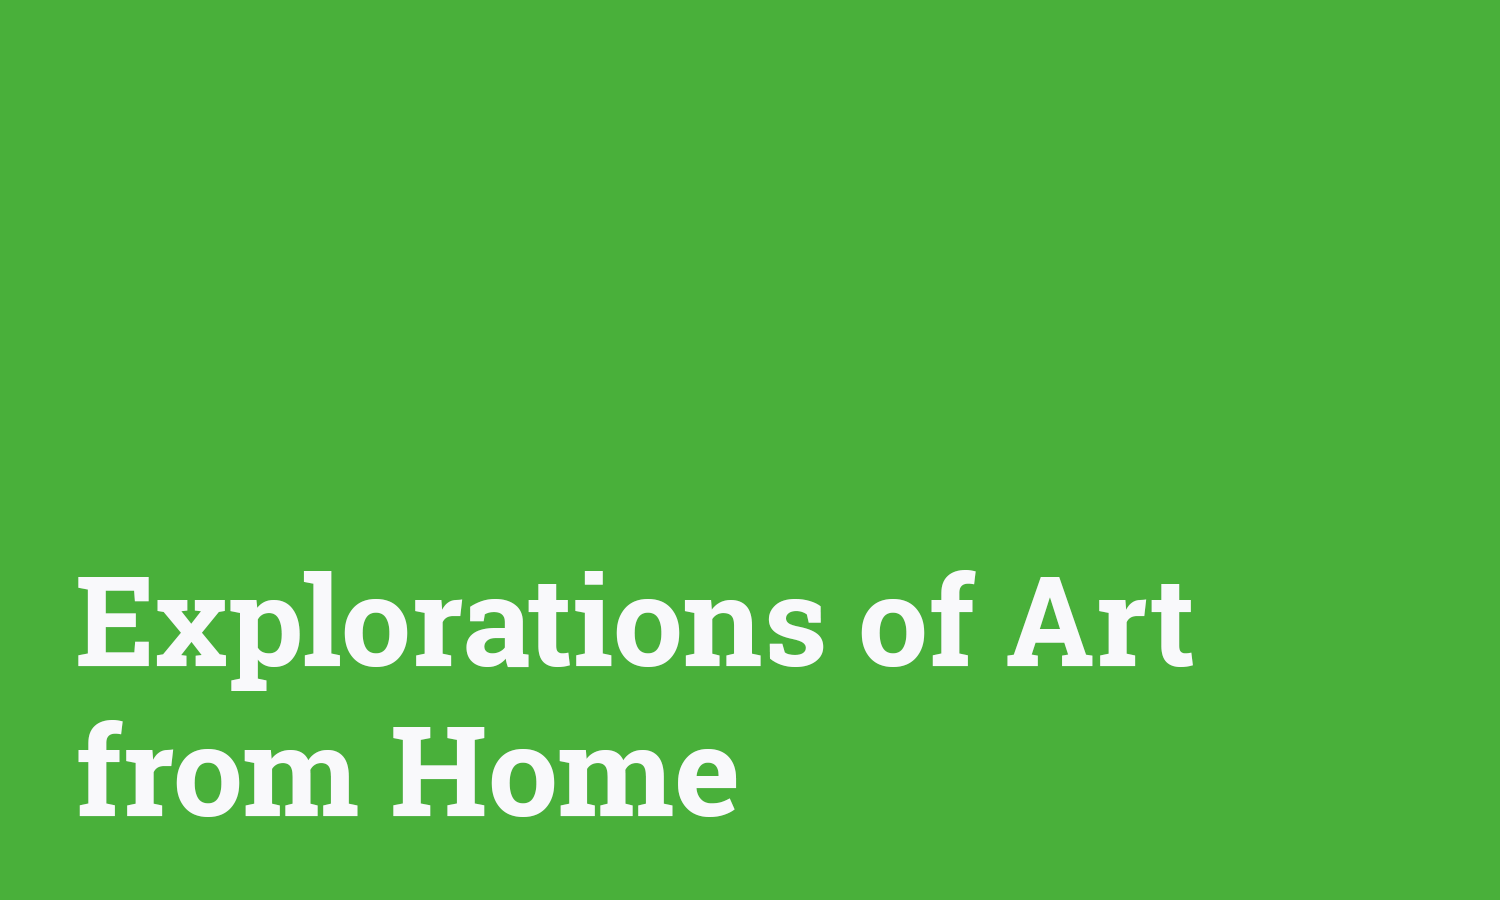 White text on green background that reads "Explorations of Art from Home"